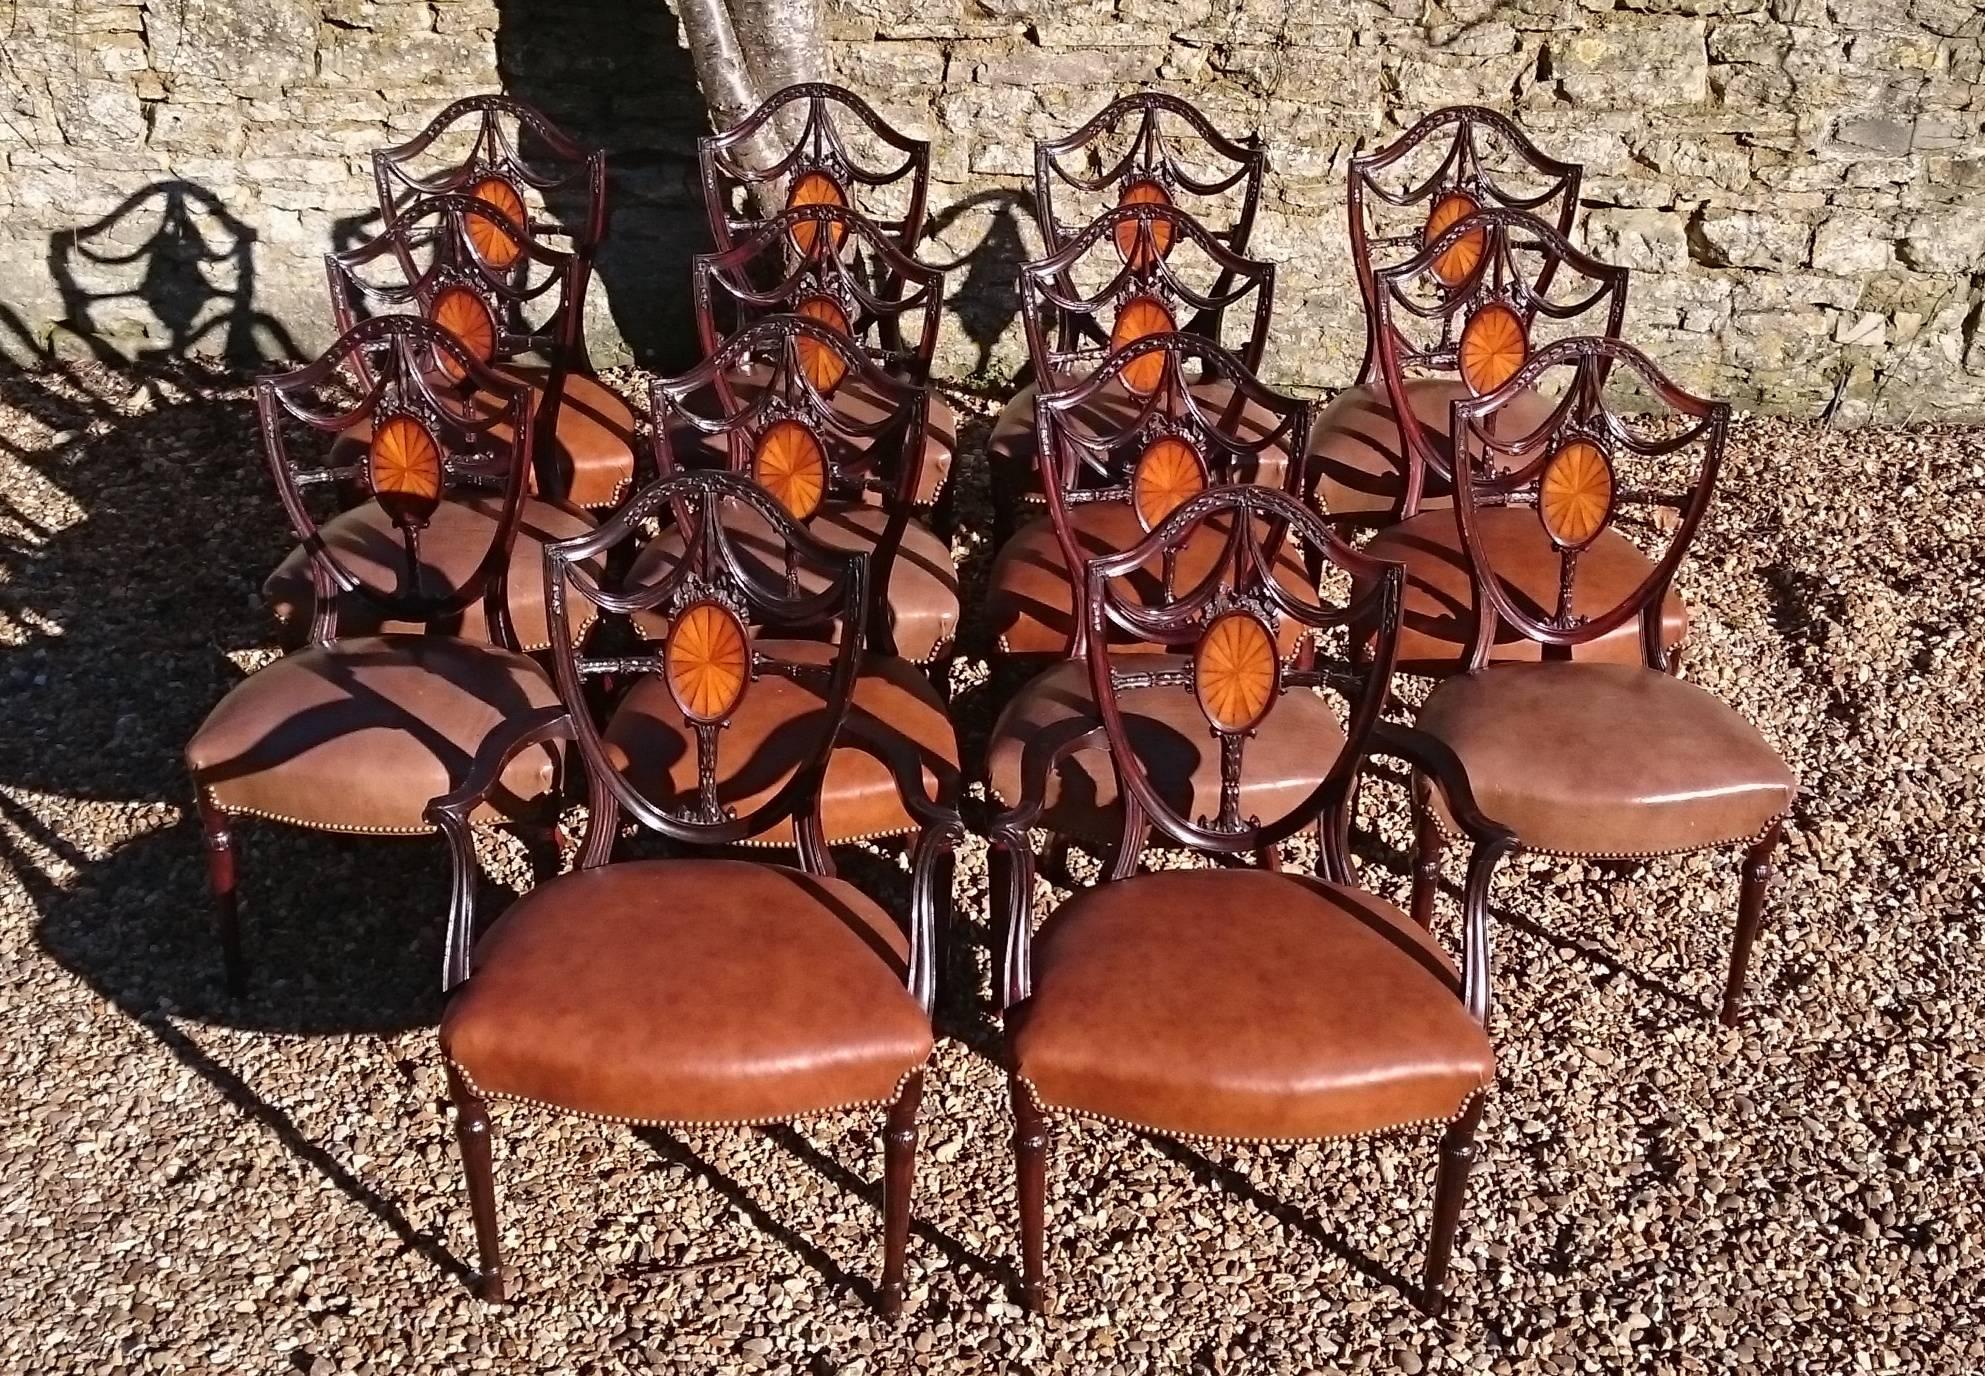 Large set of 14 Edwardian period Hepplewhite antique dining chairs. This is a remarkably fine quality set of dining chairs made after designs by the renowned 18th century furniture designer George Hepplewhite. Although there is no furniture